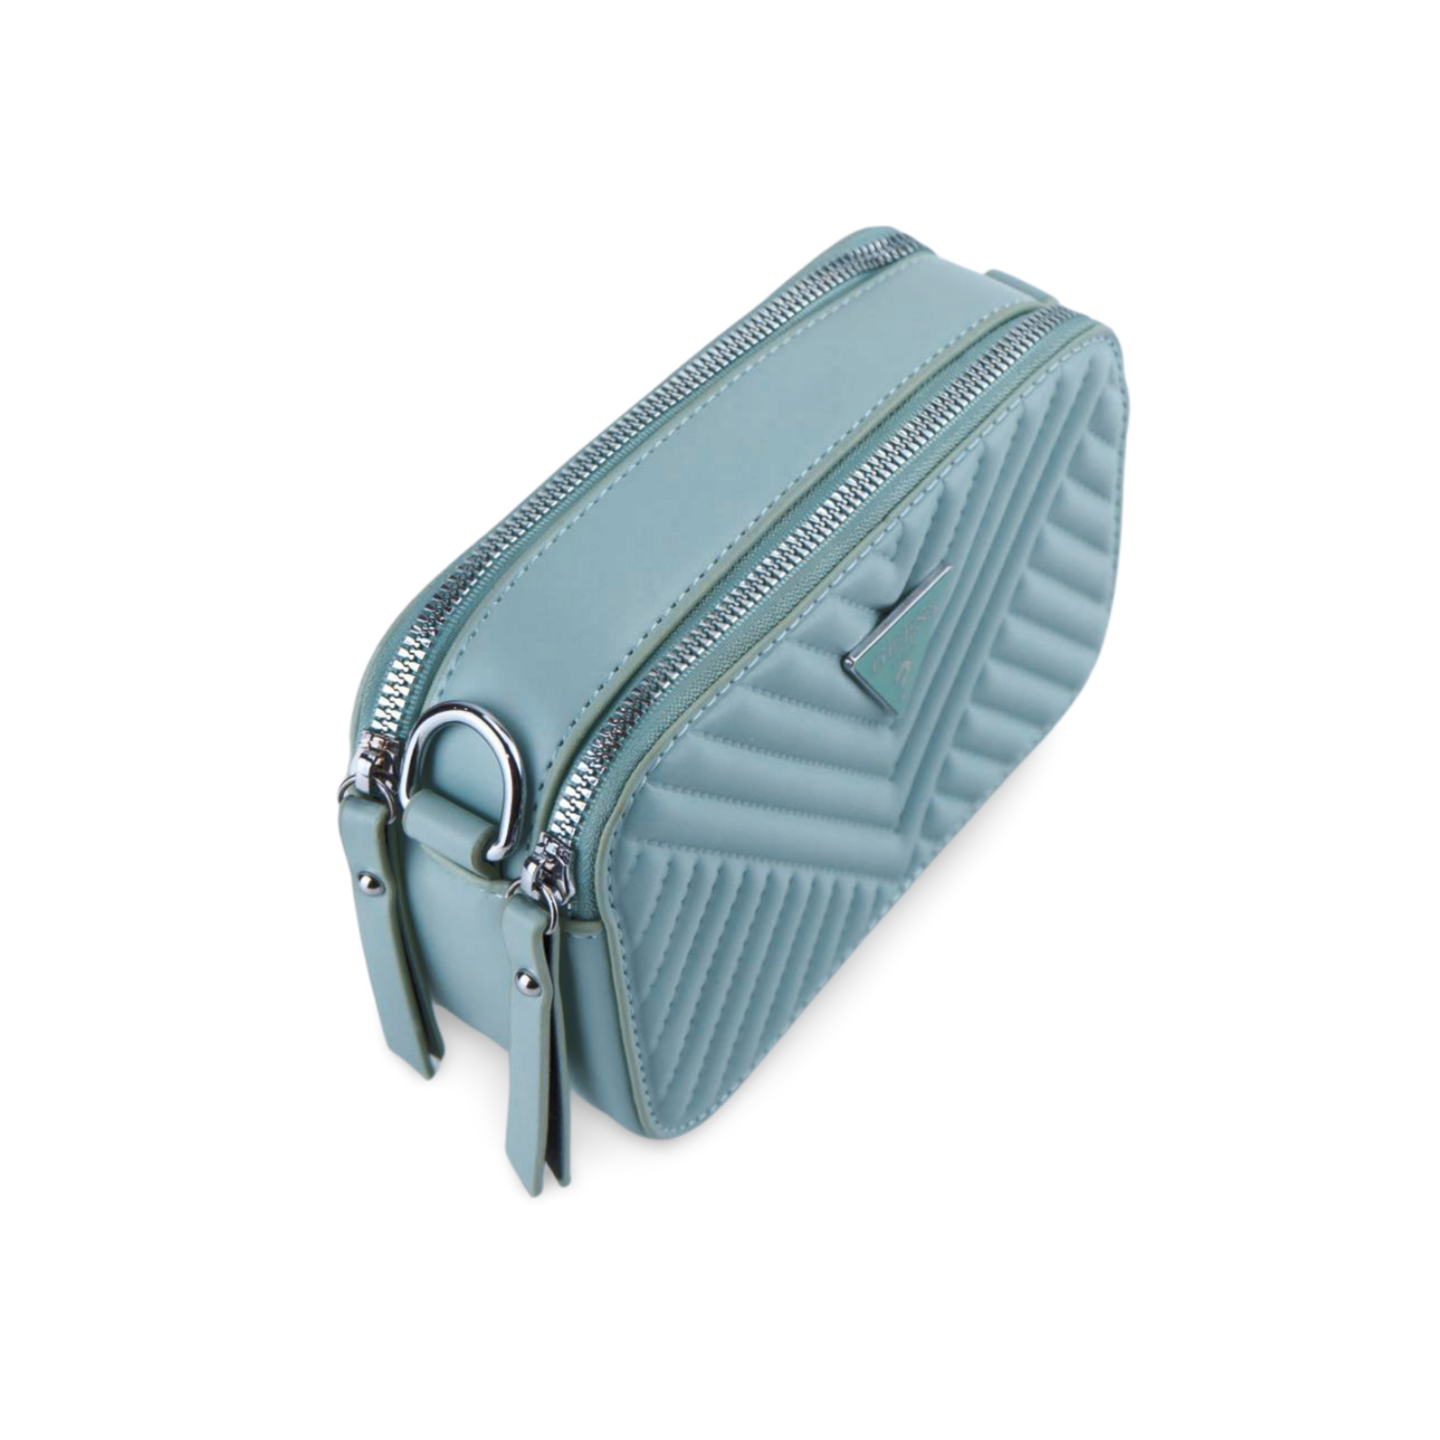 Travel Crossbody Bag with Removable Strap